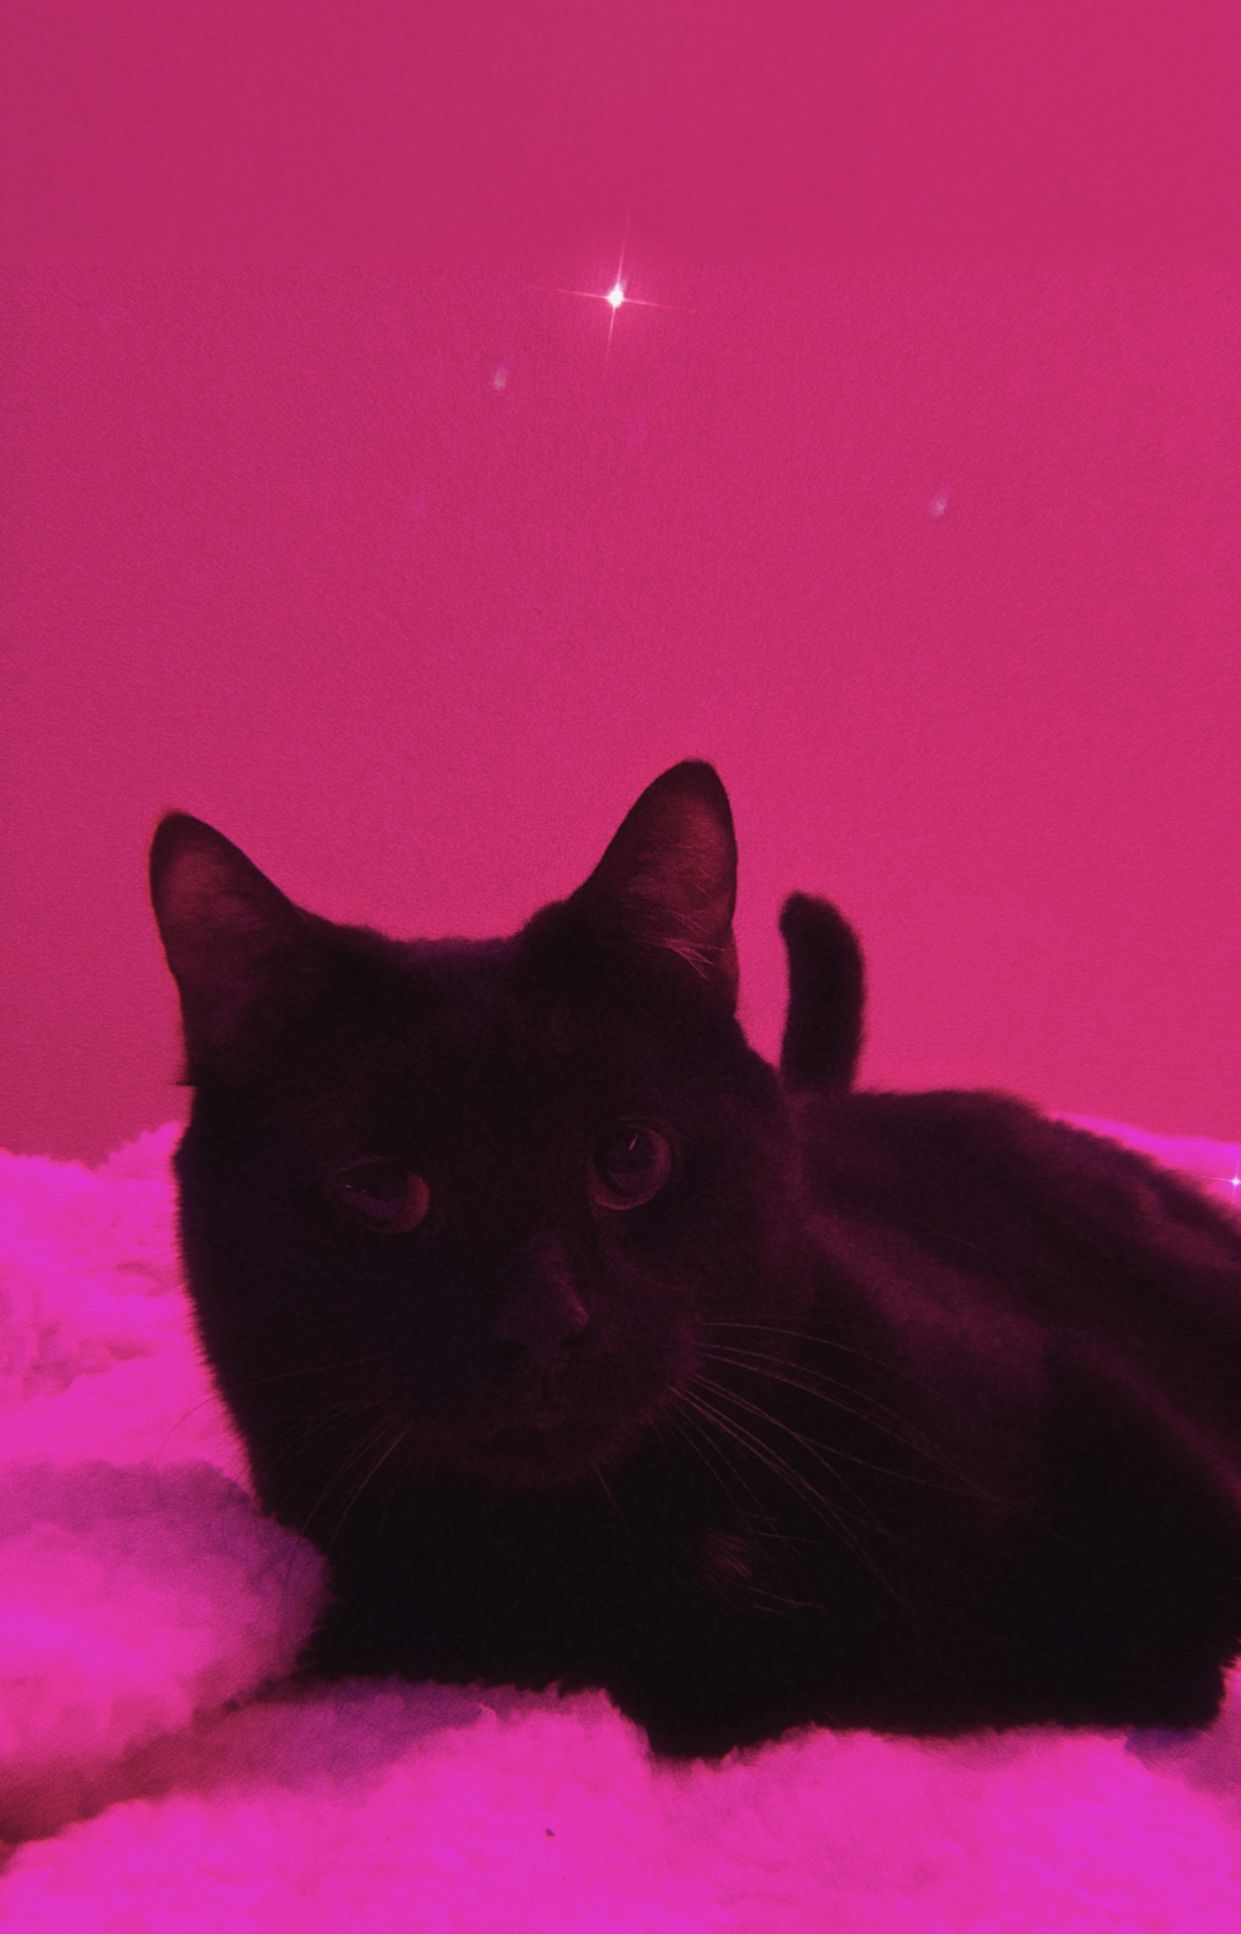 PINK LUNA SAILOR MOON. Black cat aesthetic, Cute cats and dogs, Cat aesthetic